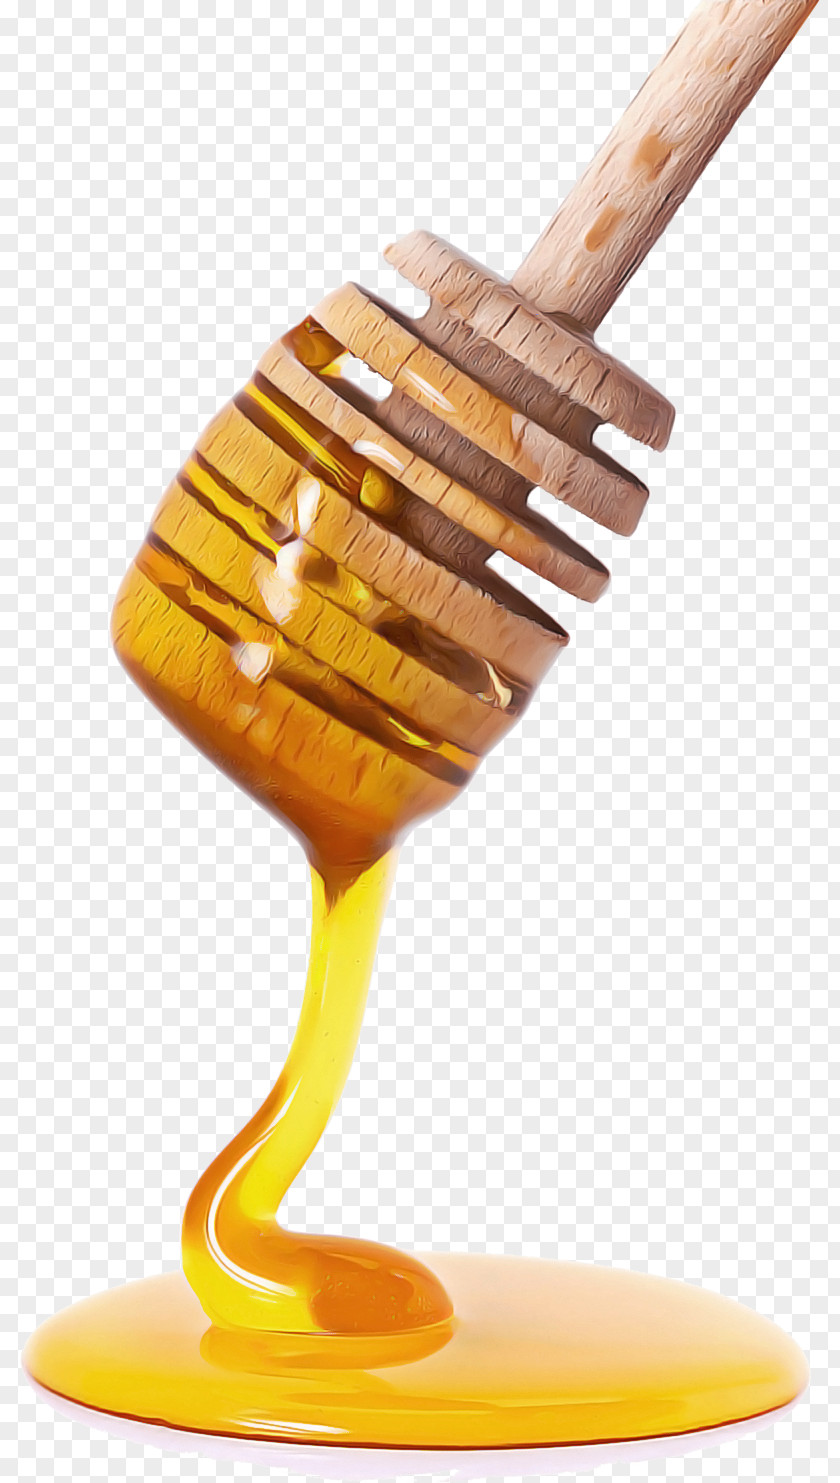 Dripping Comb Honey Background PNG